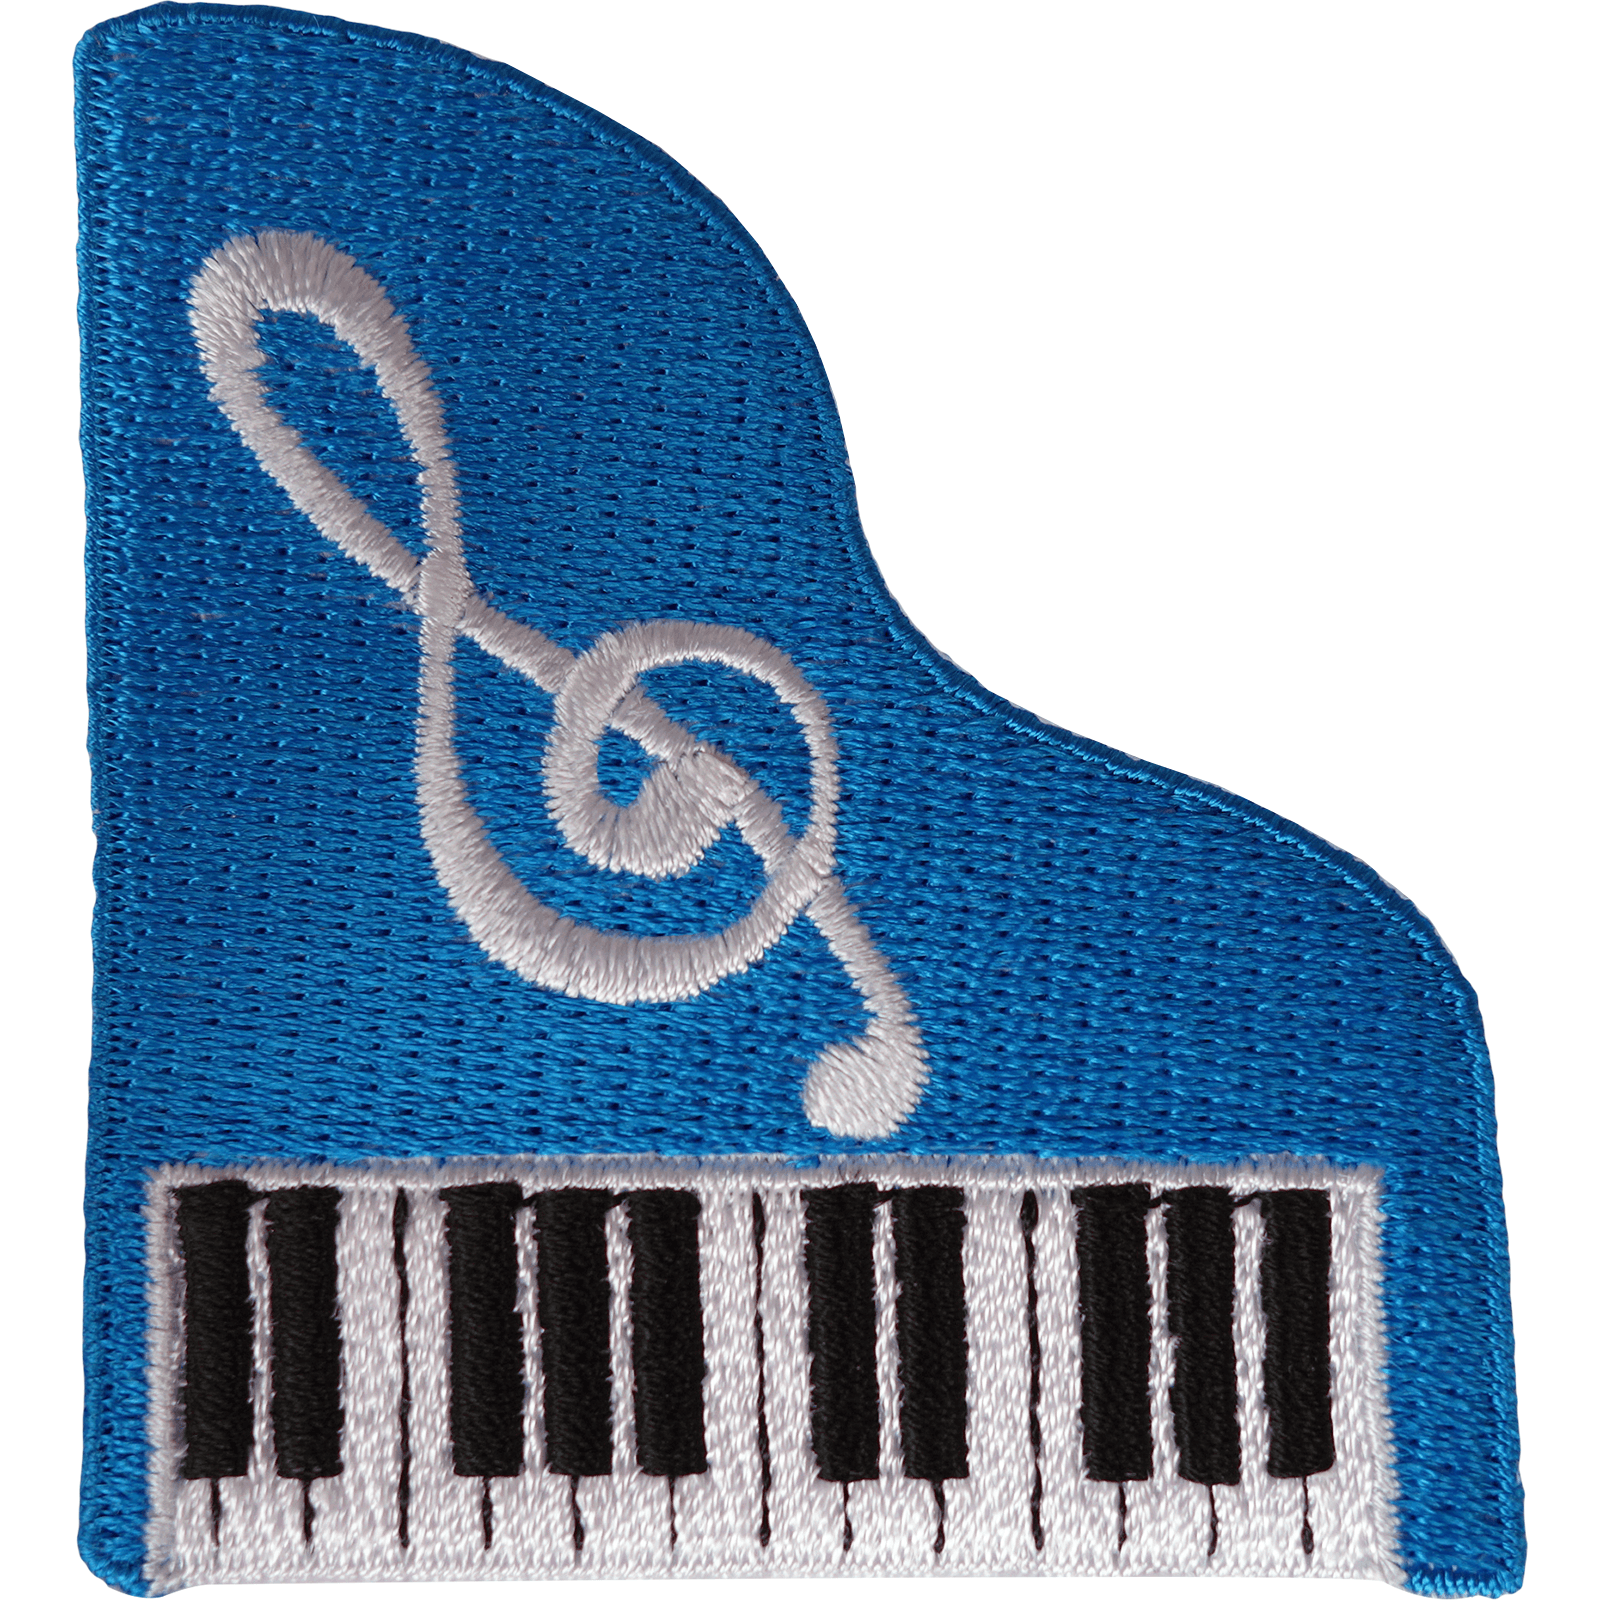 Piano Patch Iron Sew On Clothes Embroidered Badge Music Note Embroidery Applique